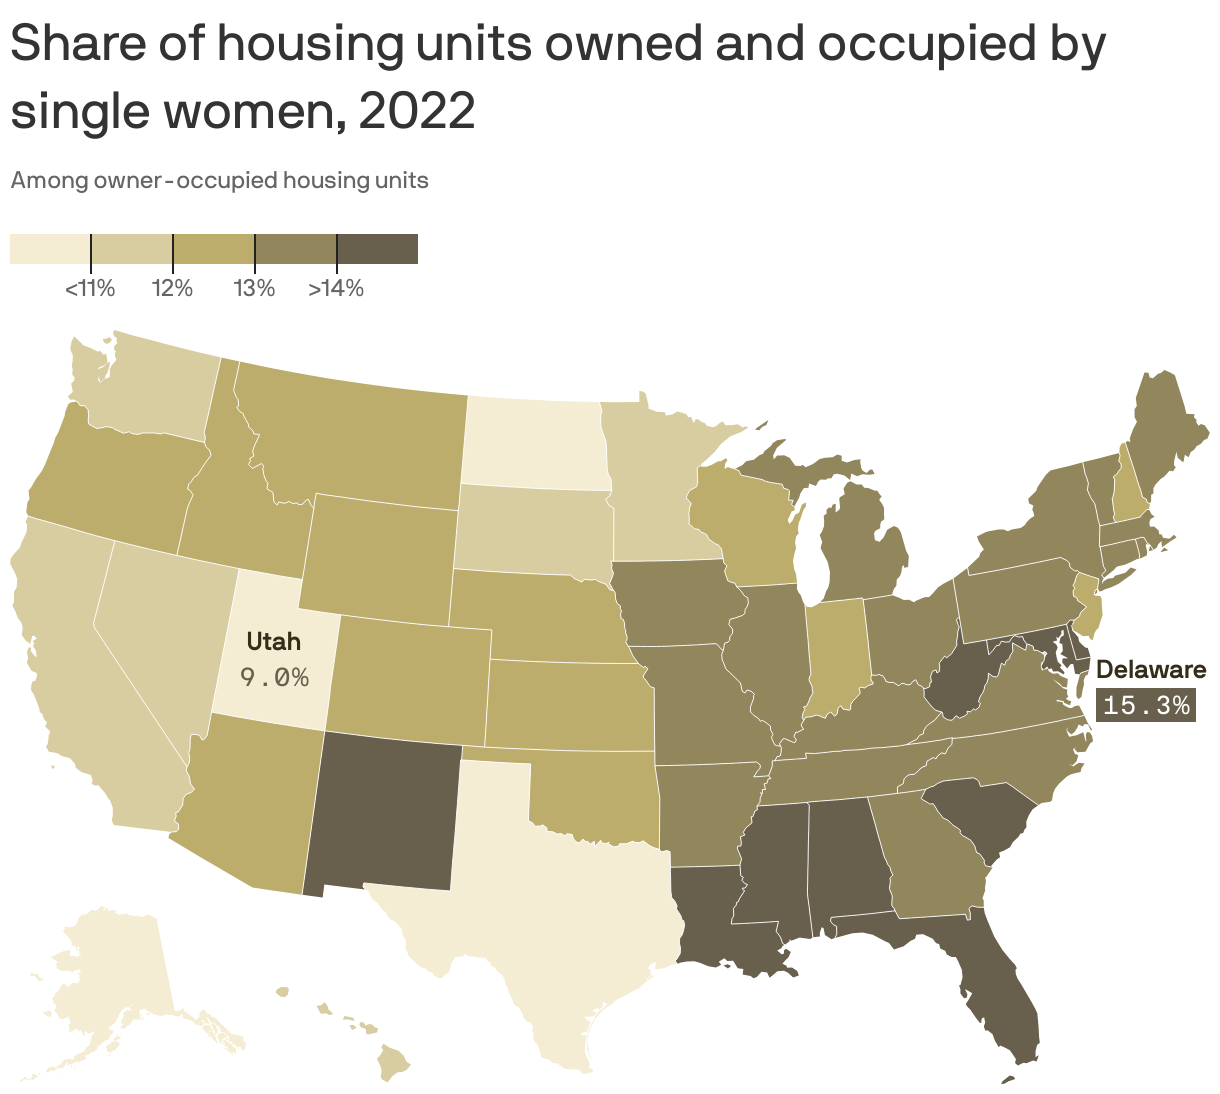 Share of housing units owned and occupied by single women, 2022